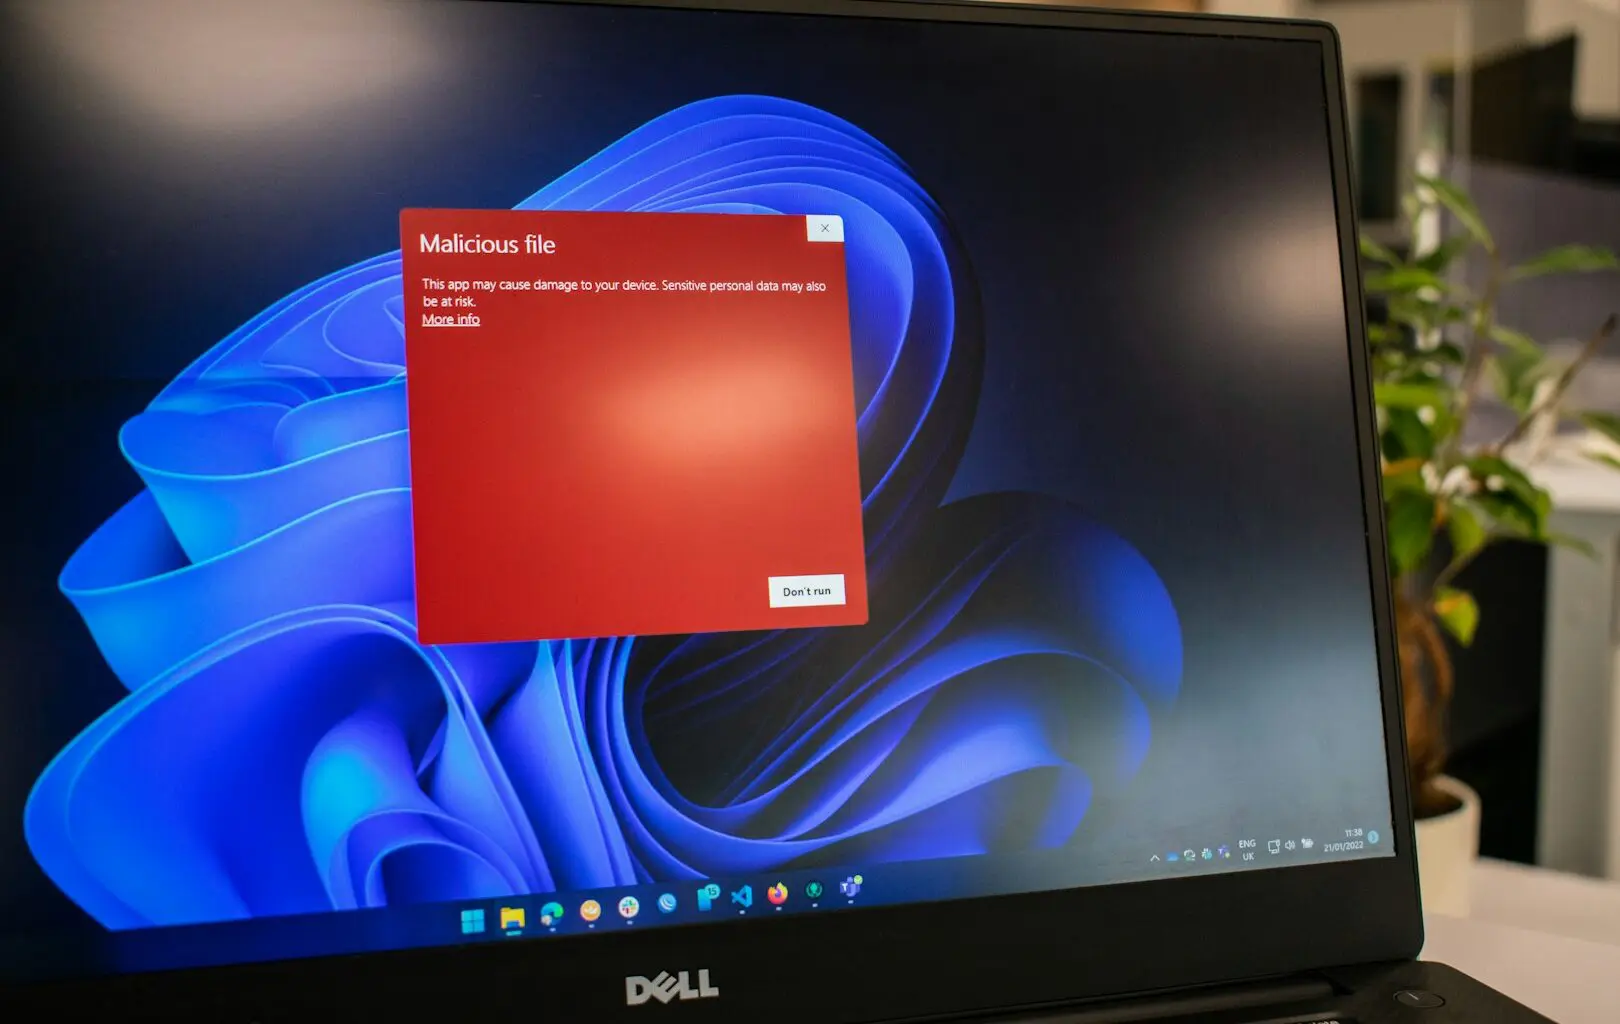 Red alert on a Dell laptop screen warns of a malicious file potentially linked to cryptojacking, highlighting the risk of device damage and data theft.